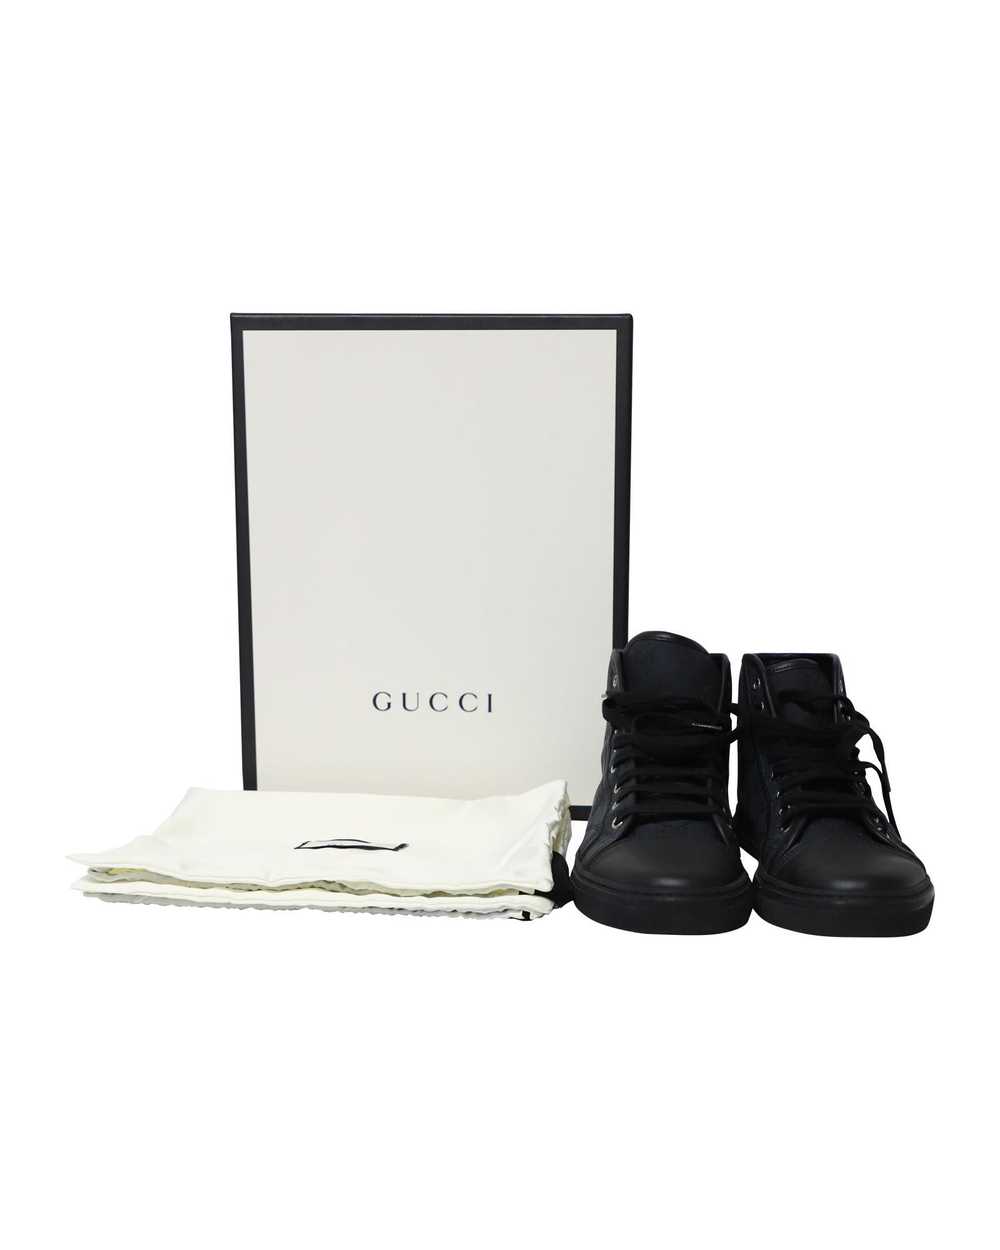 Gucci GG High Cut Sneakers in Navy Blue Canvas - image 8